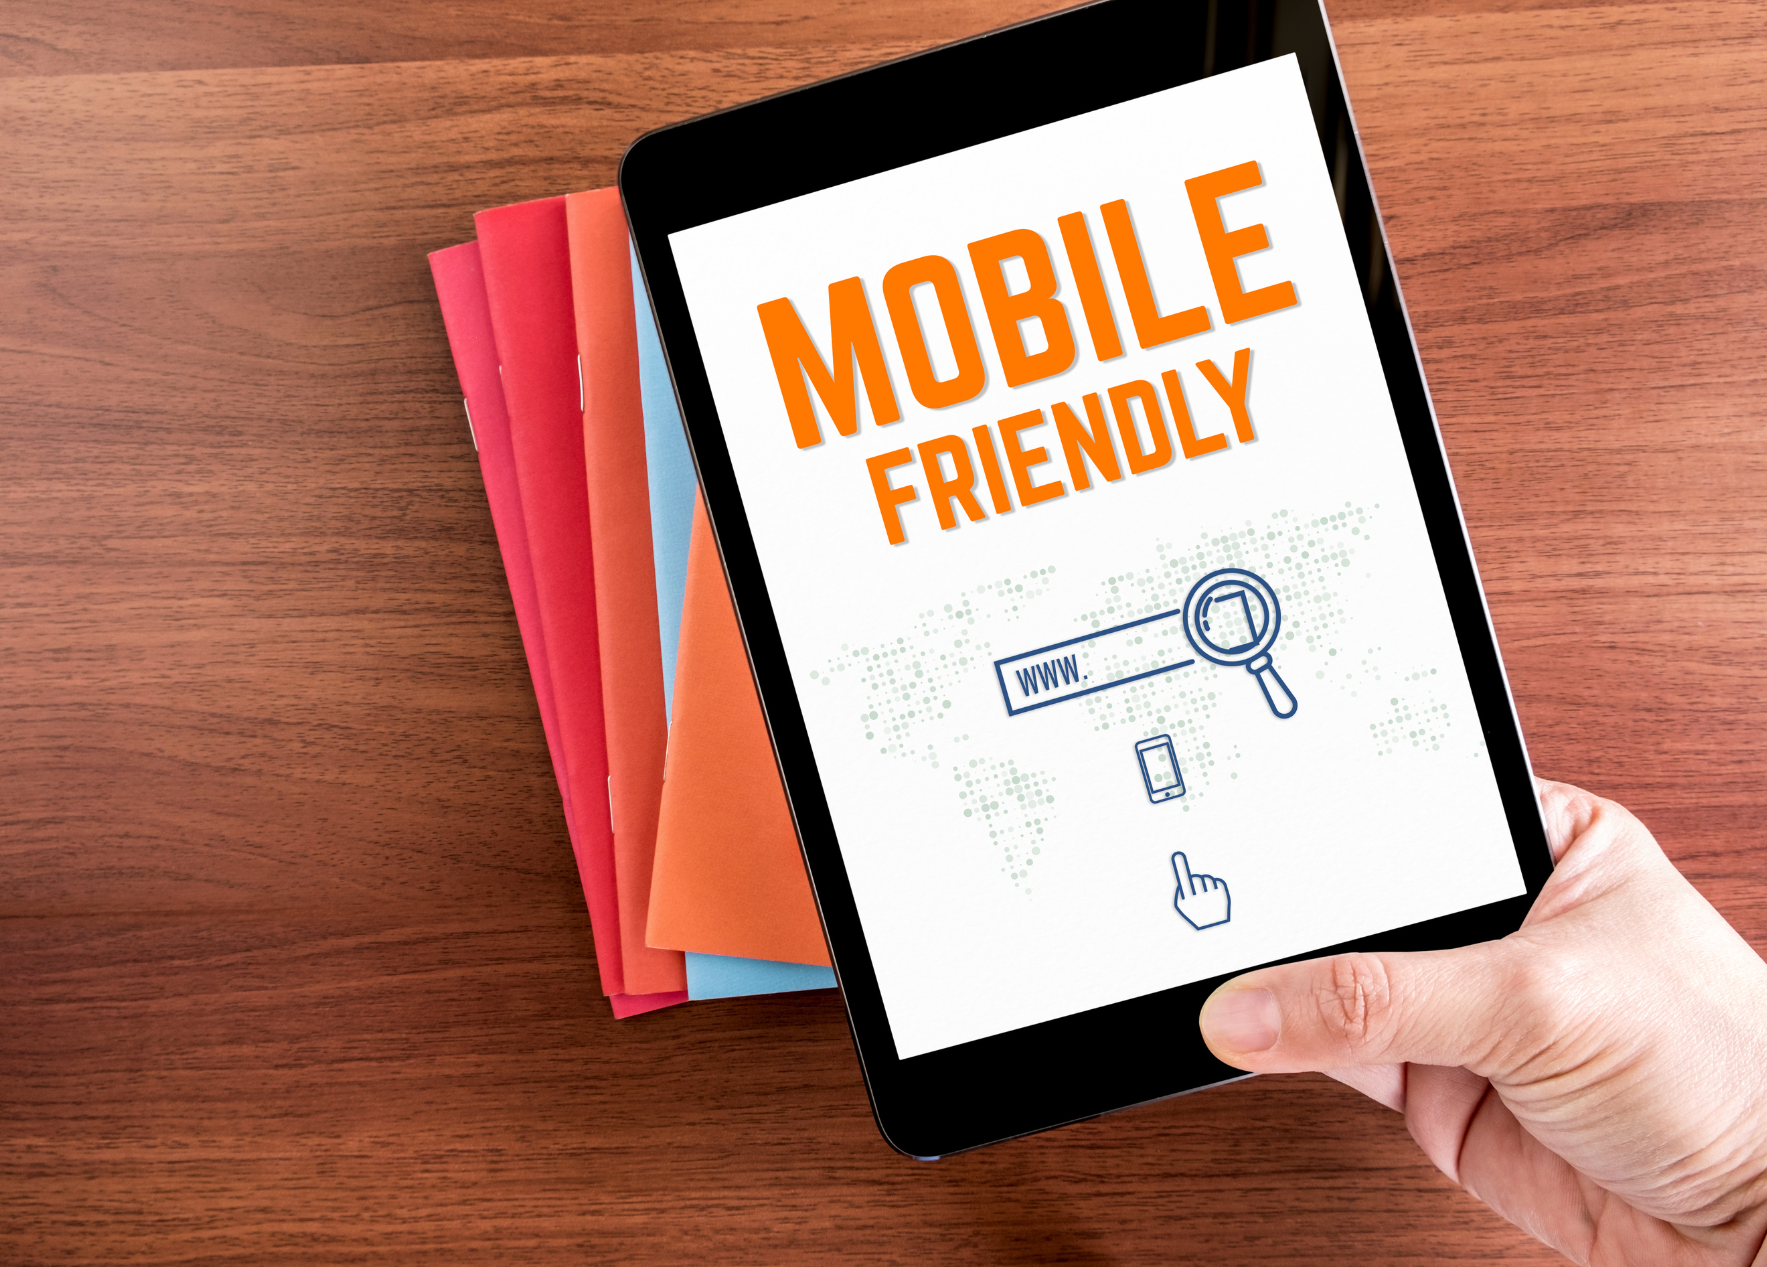 Make your website mobile friendly